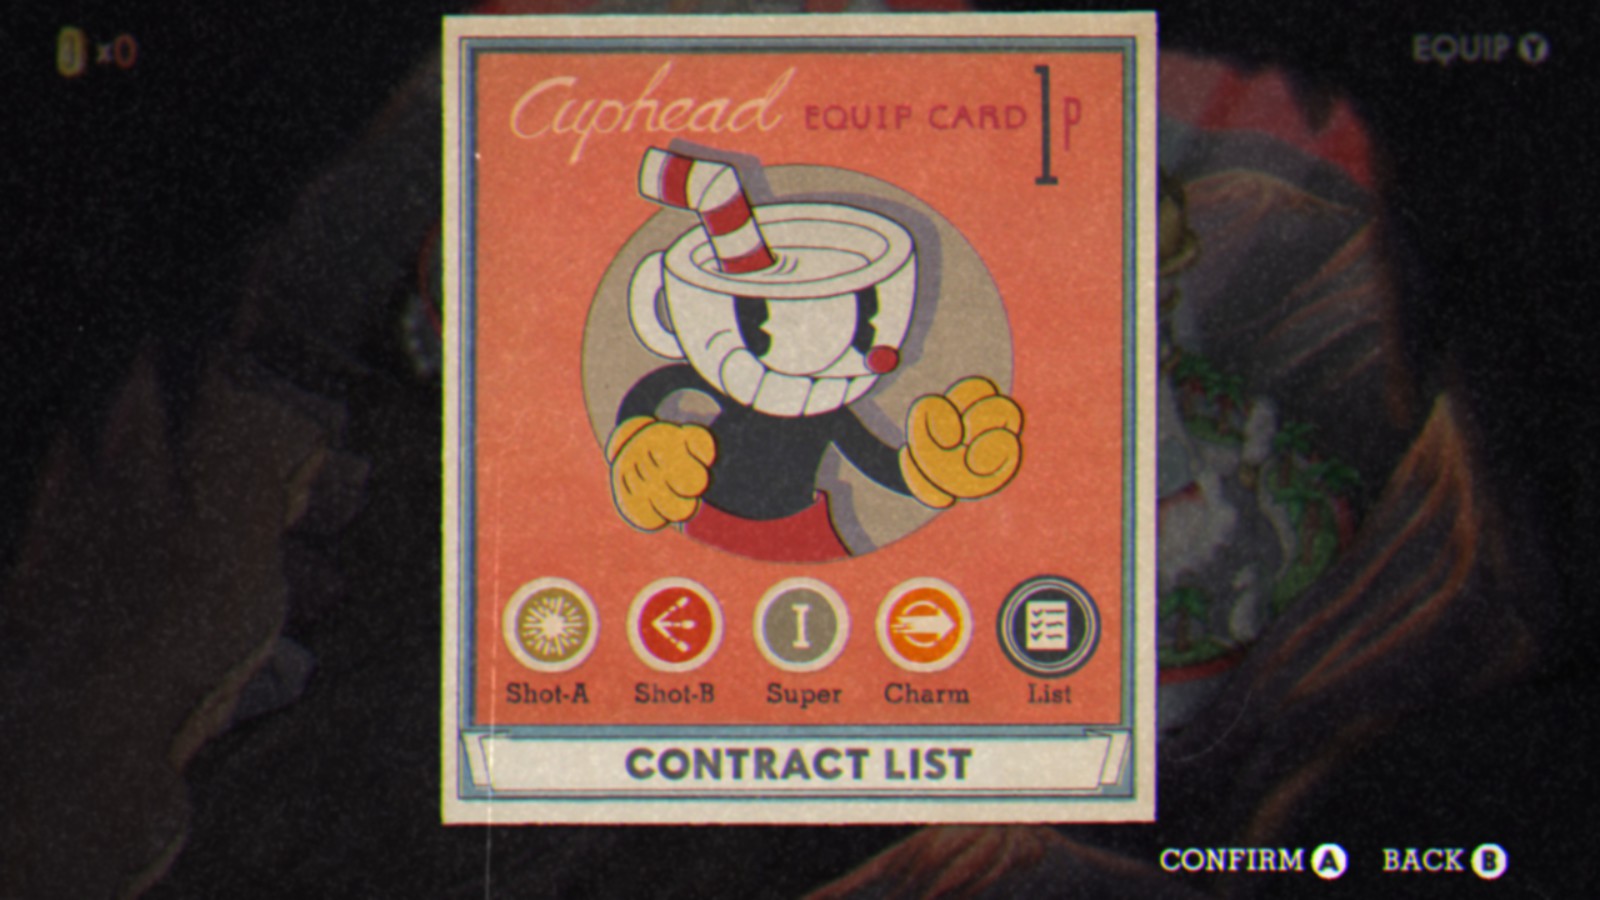 Cuphead Video game Dice Boss, king transparent background PNG